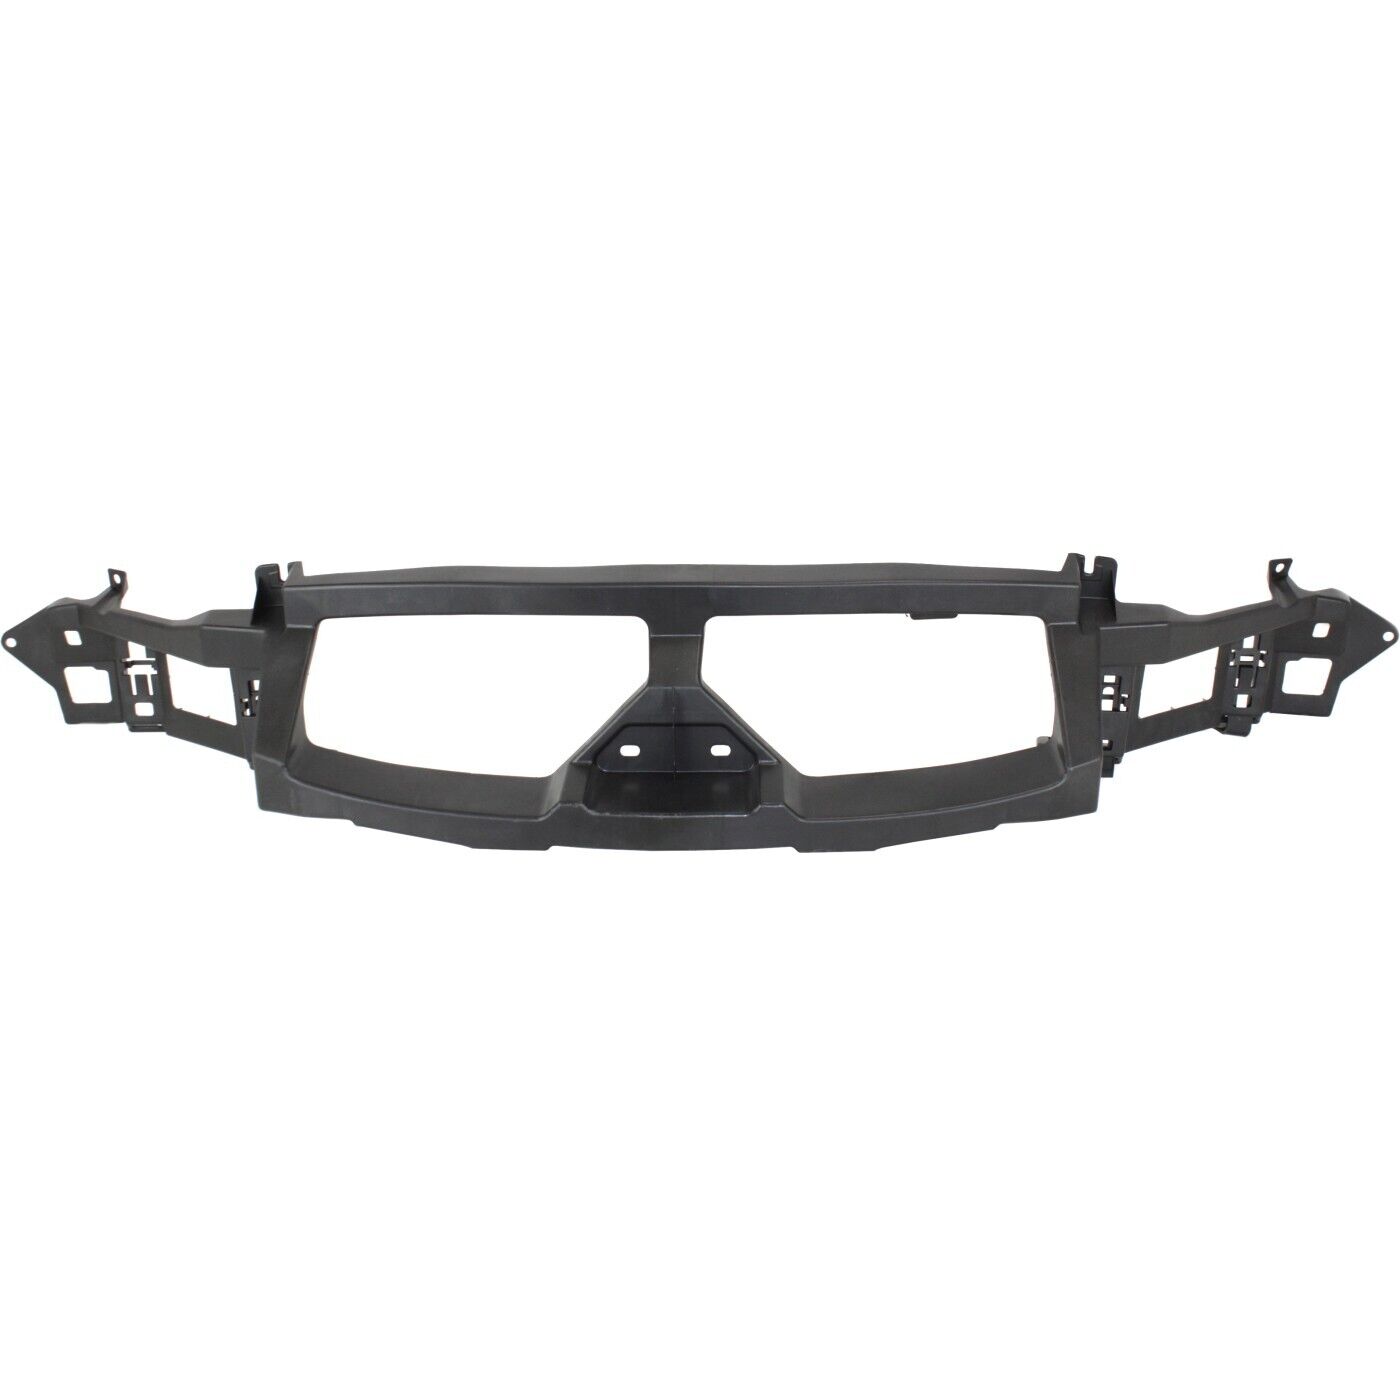 Header Panel For 2005-07 Buick LaCrosse Allure Bumper Support